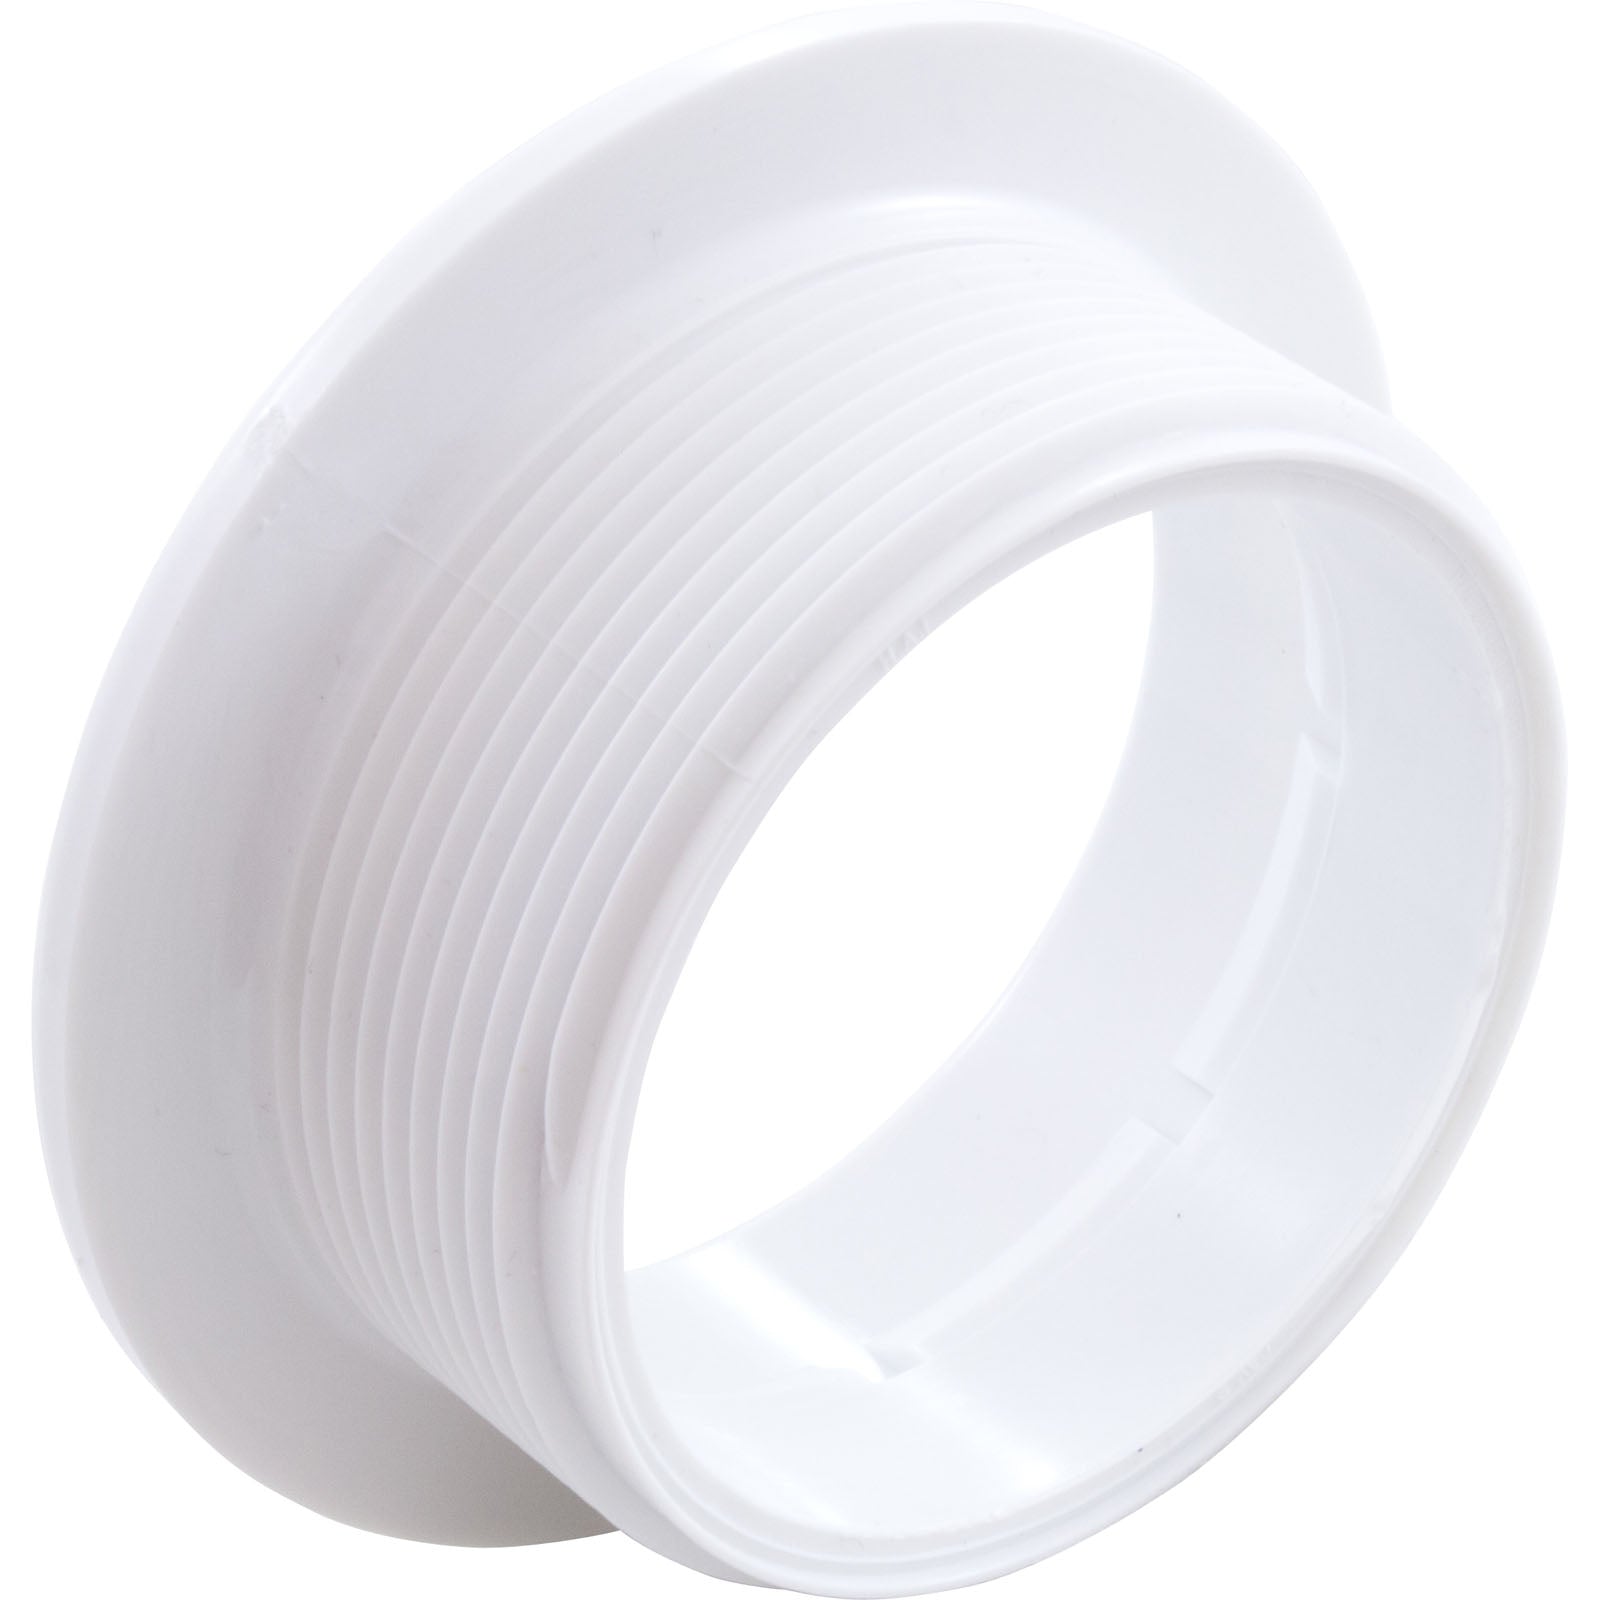 Wall Fitting, BWG/HAI Caged Freedom, 2-5/8"hs, White (30-5843 SBPL)